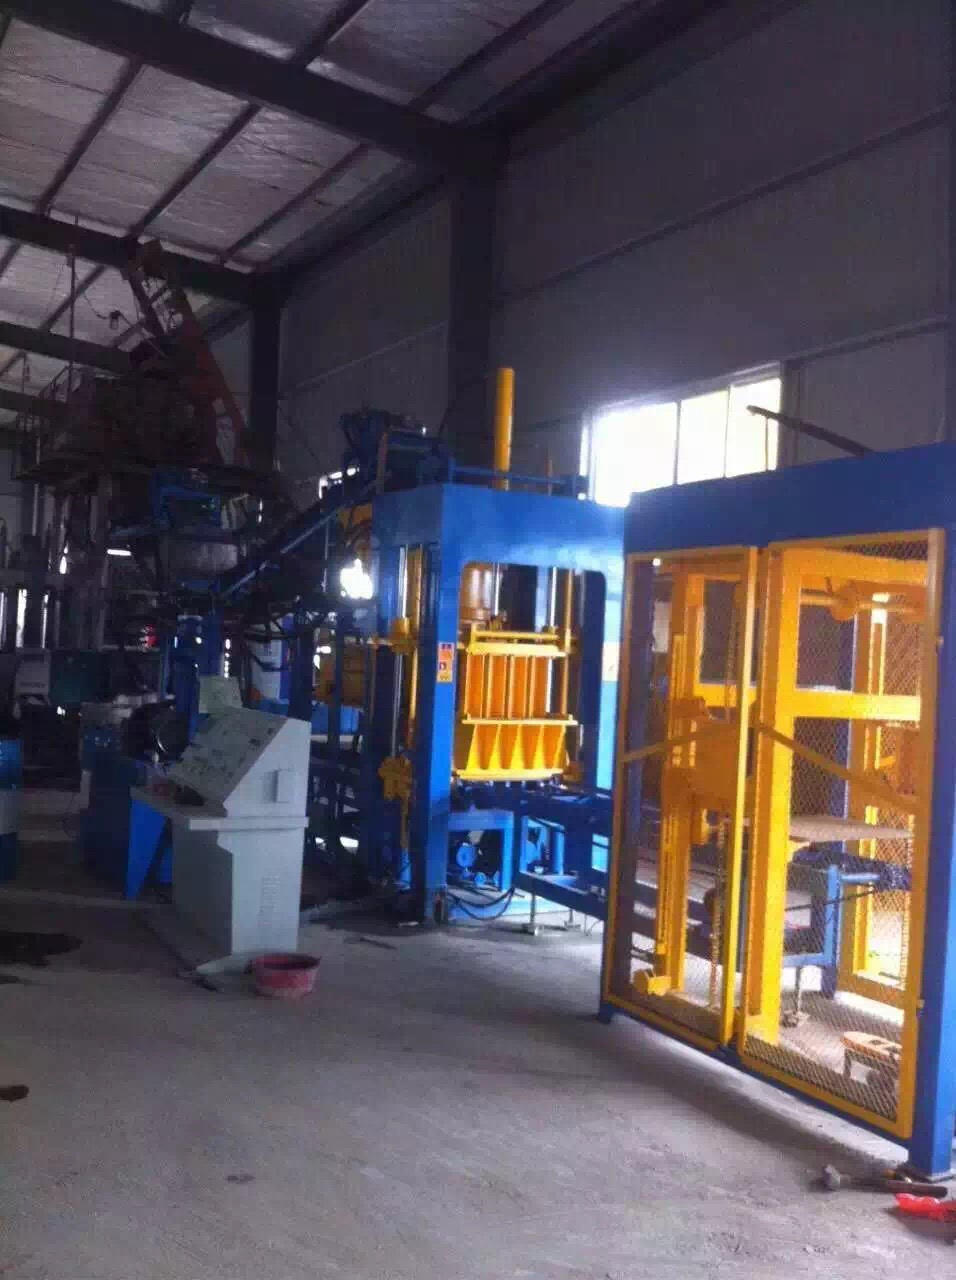 QT6-15 China Made Fly Ash Brick Machine on Best Seller Sale for India Market 